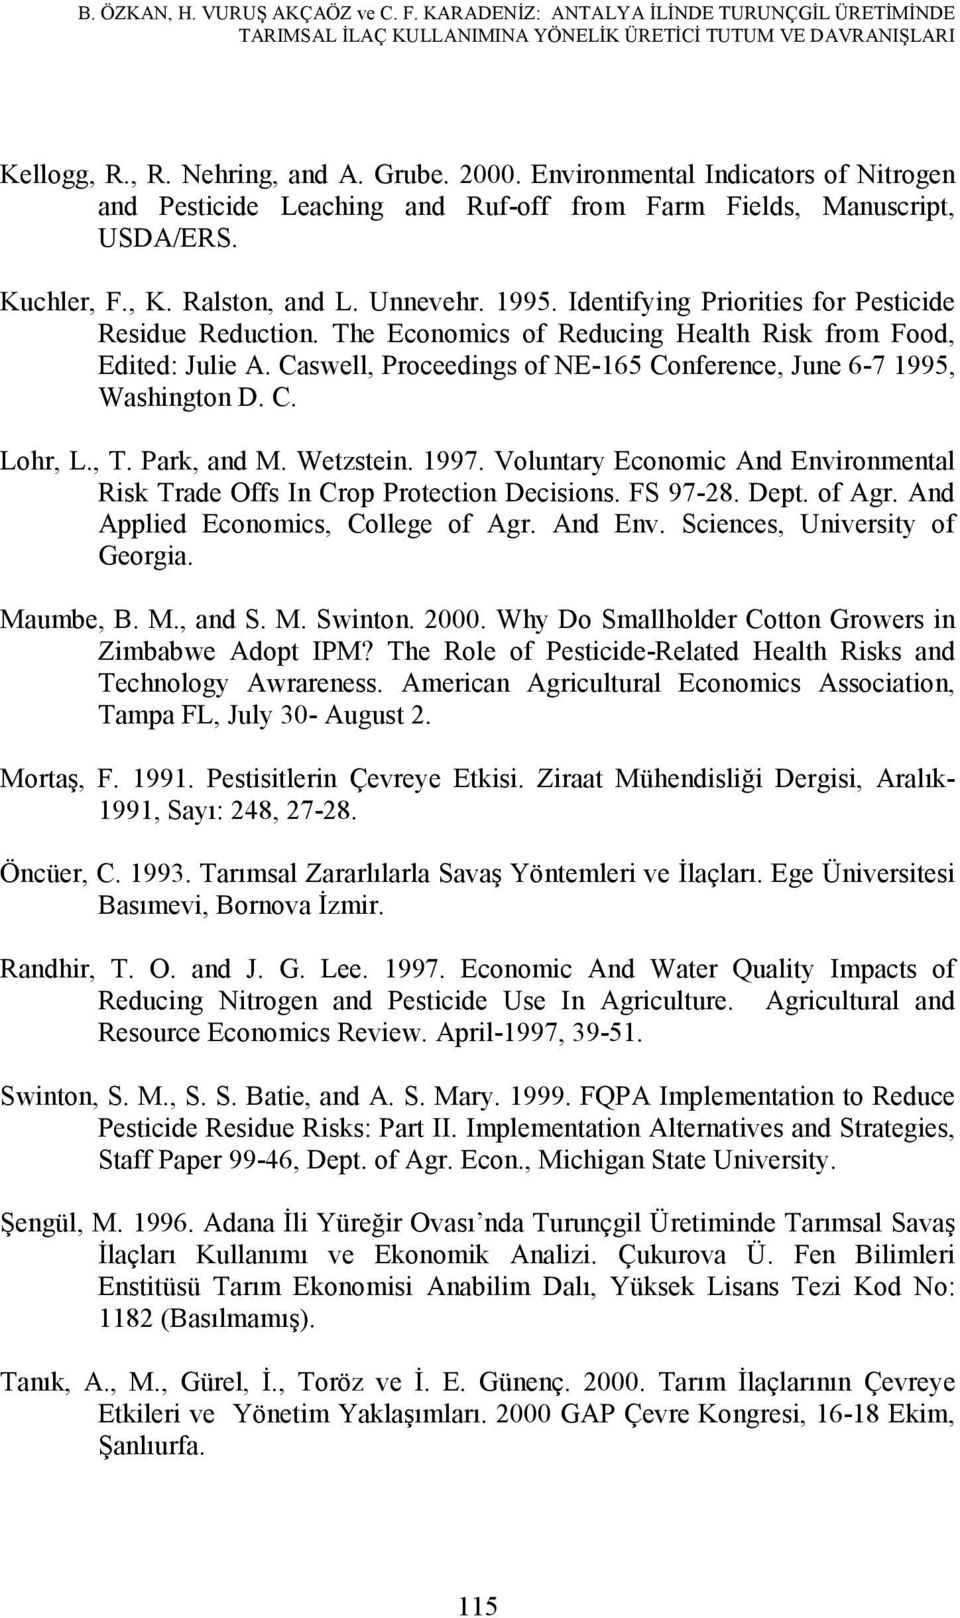 Identifying Priorities for Pesticide Residue Reduction. The Economics of Reducing Health Risk from Food, Edited: Julie A. Caswell, Proceedings of NE-165 Conference, June 6-7 1995, Washington D. C. Lohr, L.